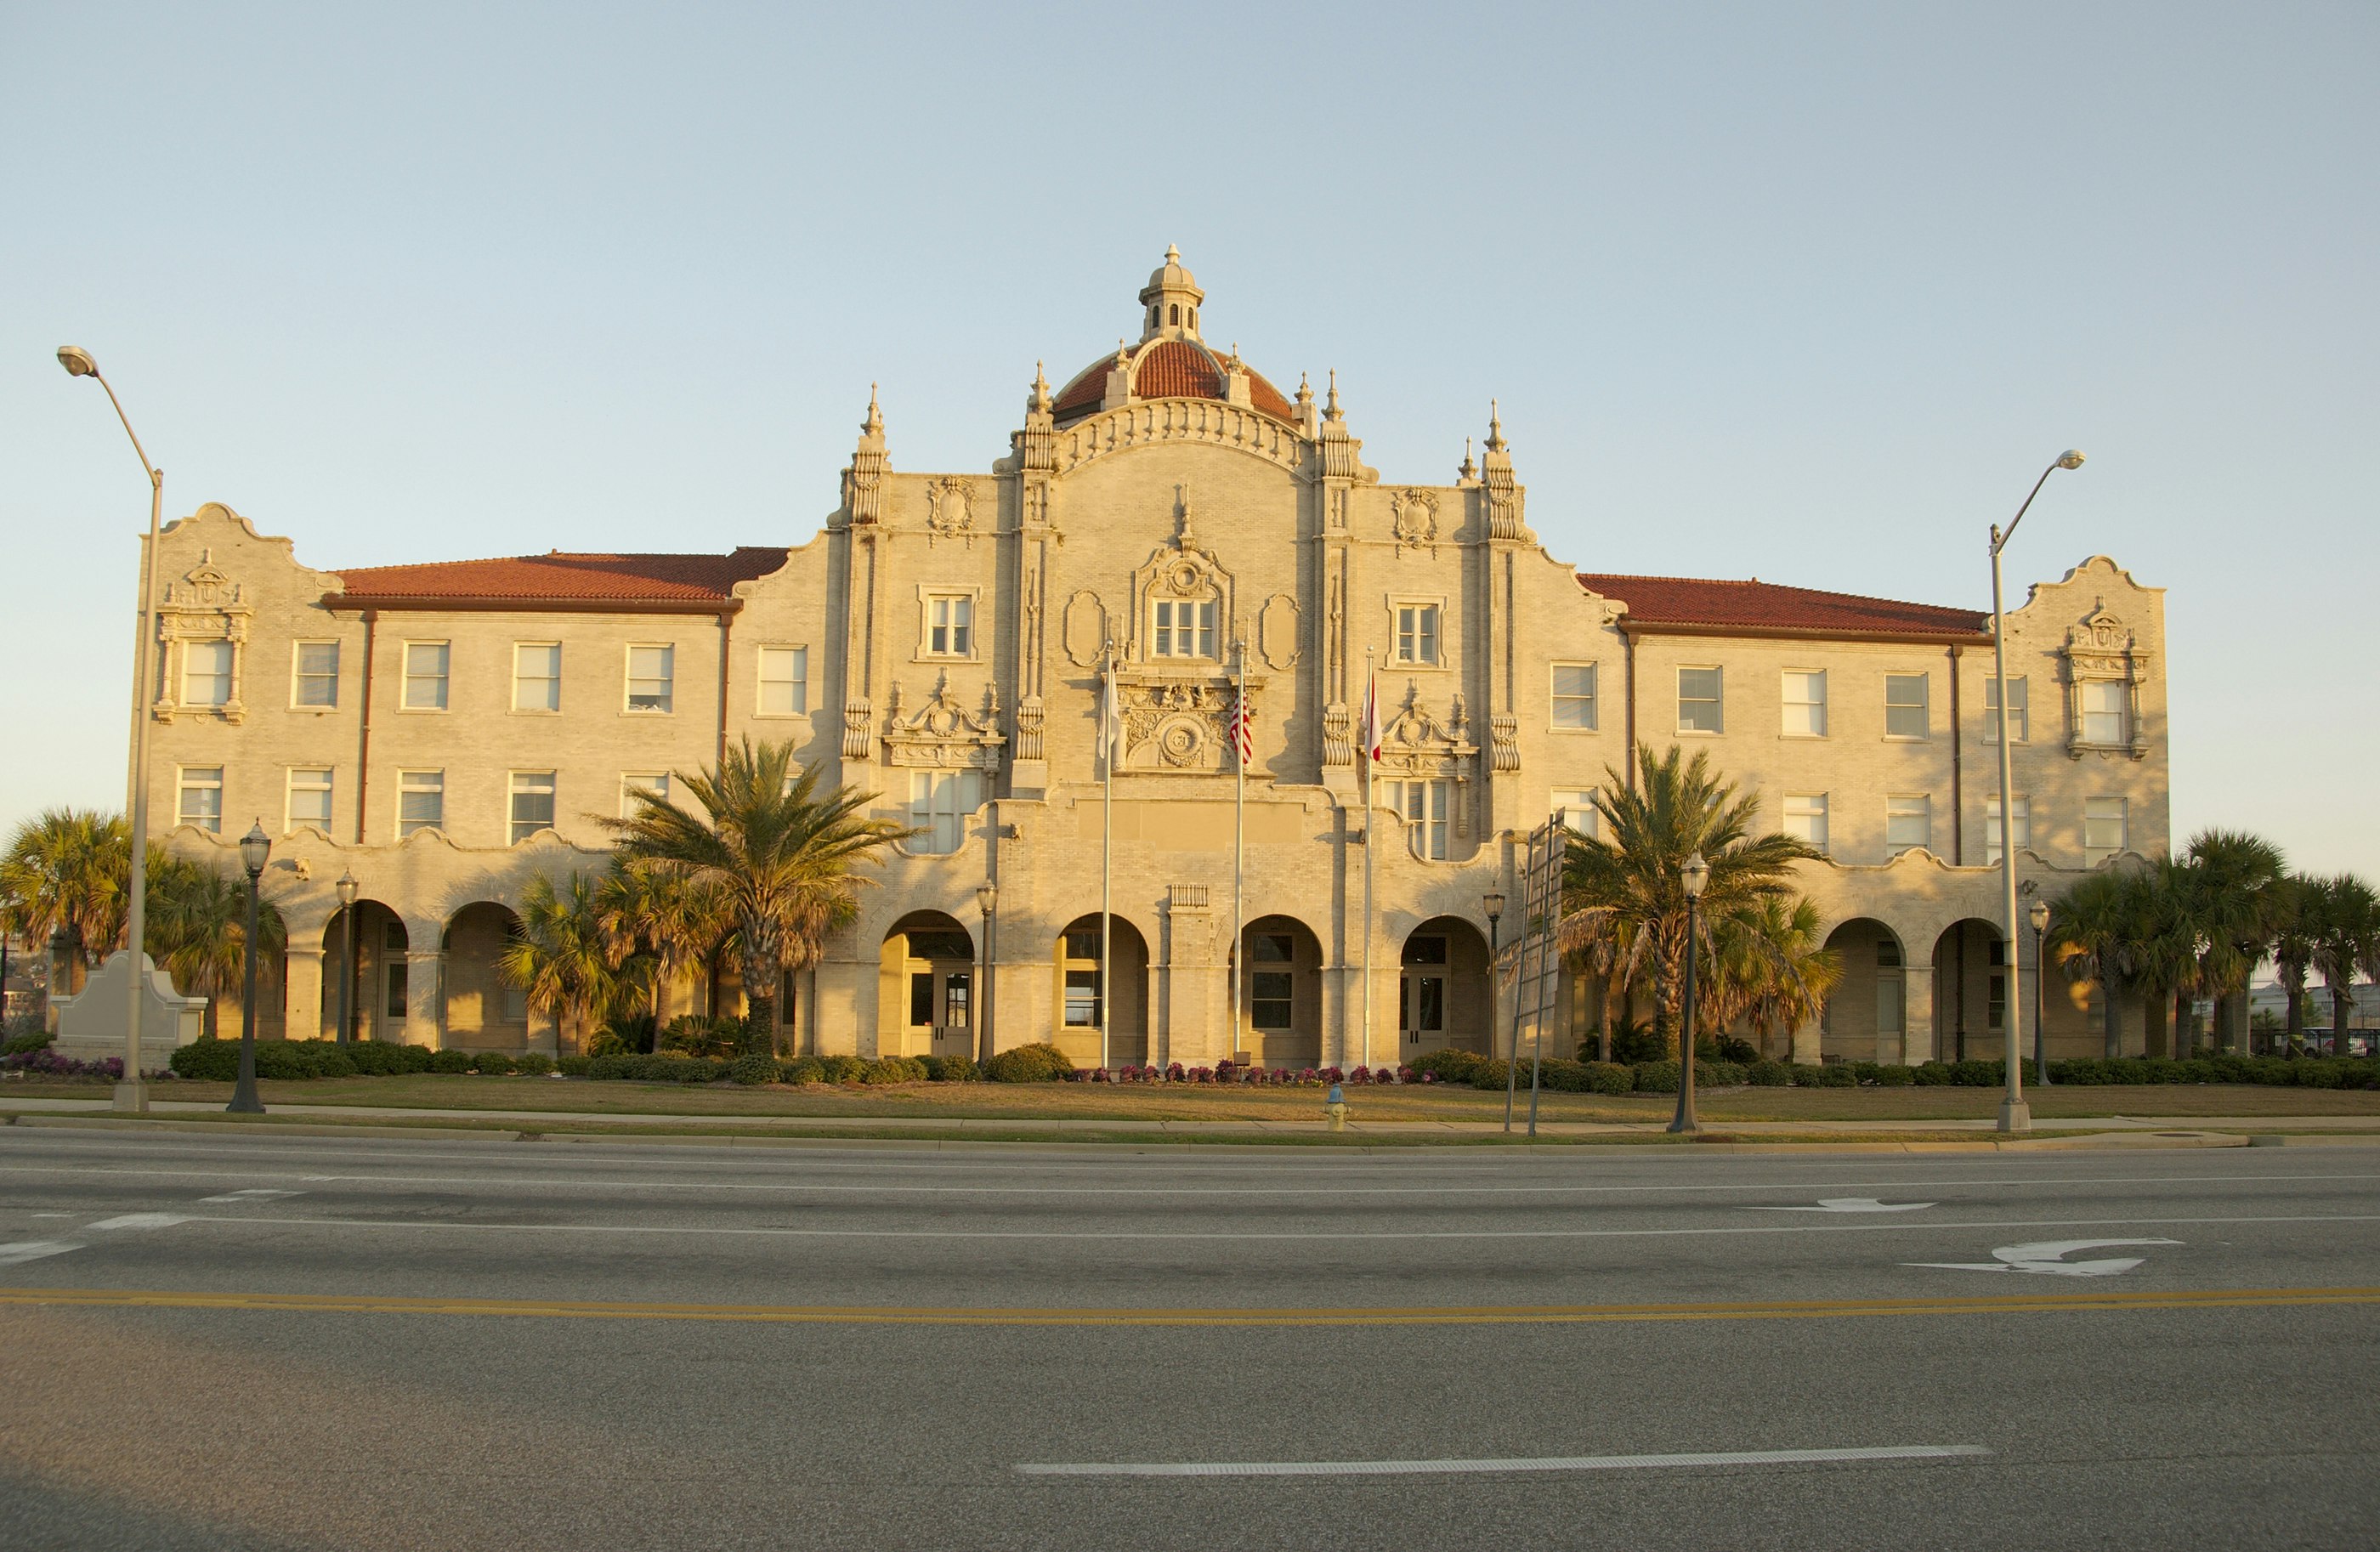 The exterior of the Gulf, Mobile, and Ohio Passenger Terminal, a historic station built in 1907 in a Mission Revival Style with a red roof and an ornate yellow-cream exterior